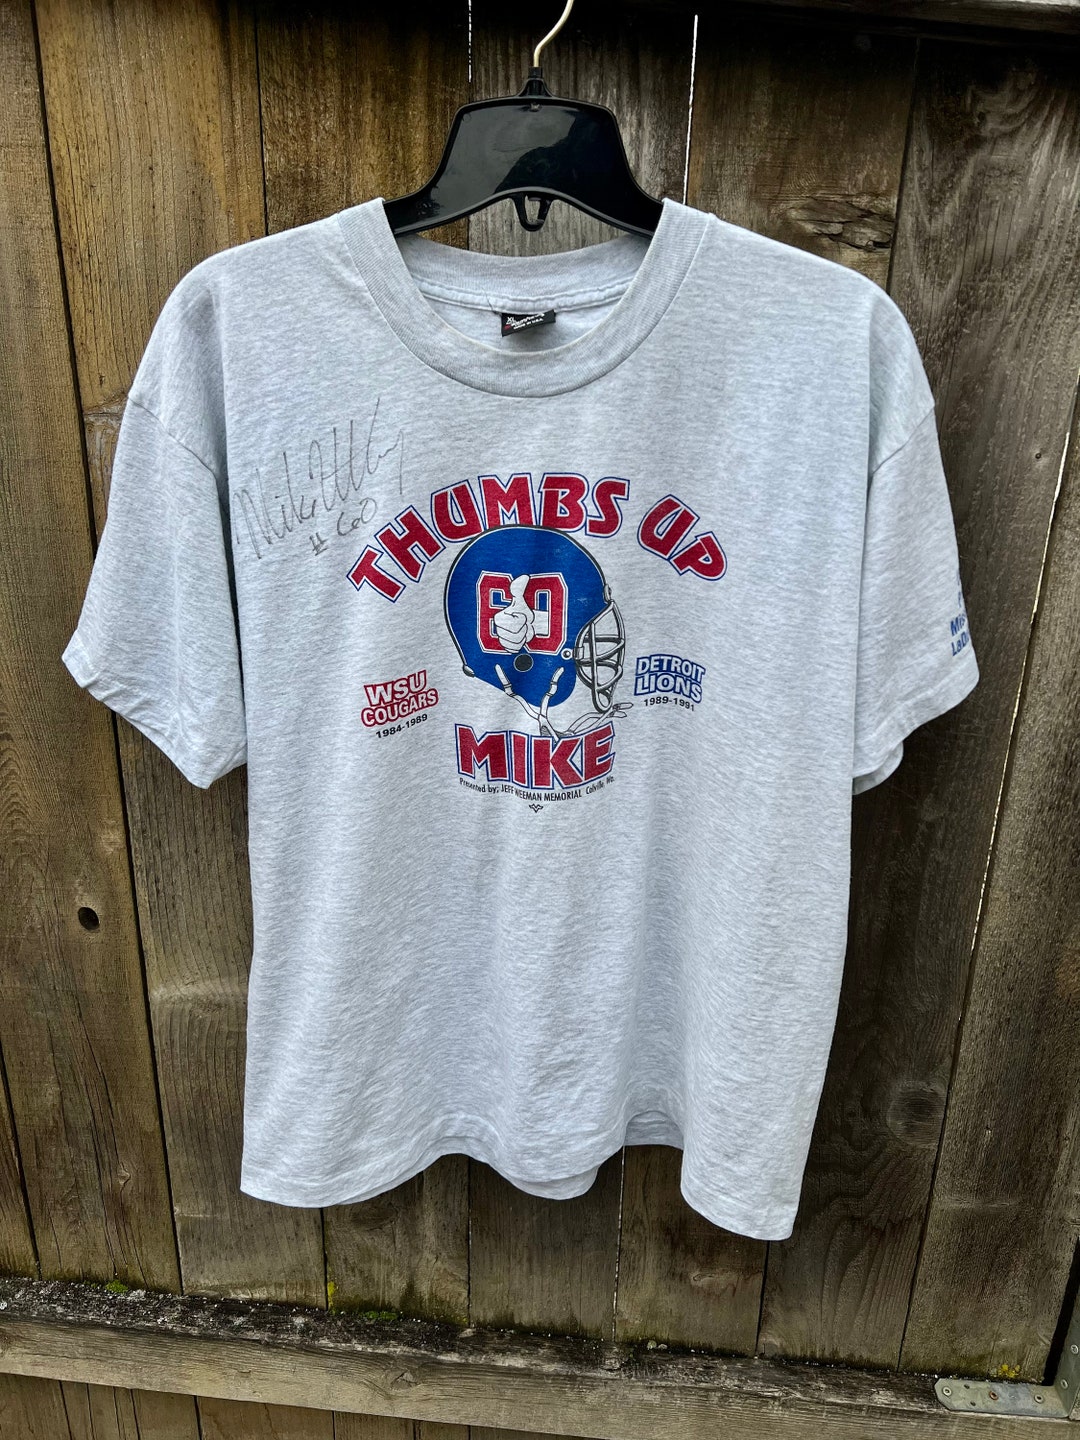 1992 Thumbs up Mike Shirt / Autographed NFL Football Detroit Lions Mike ...